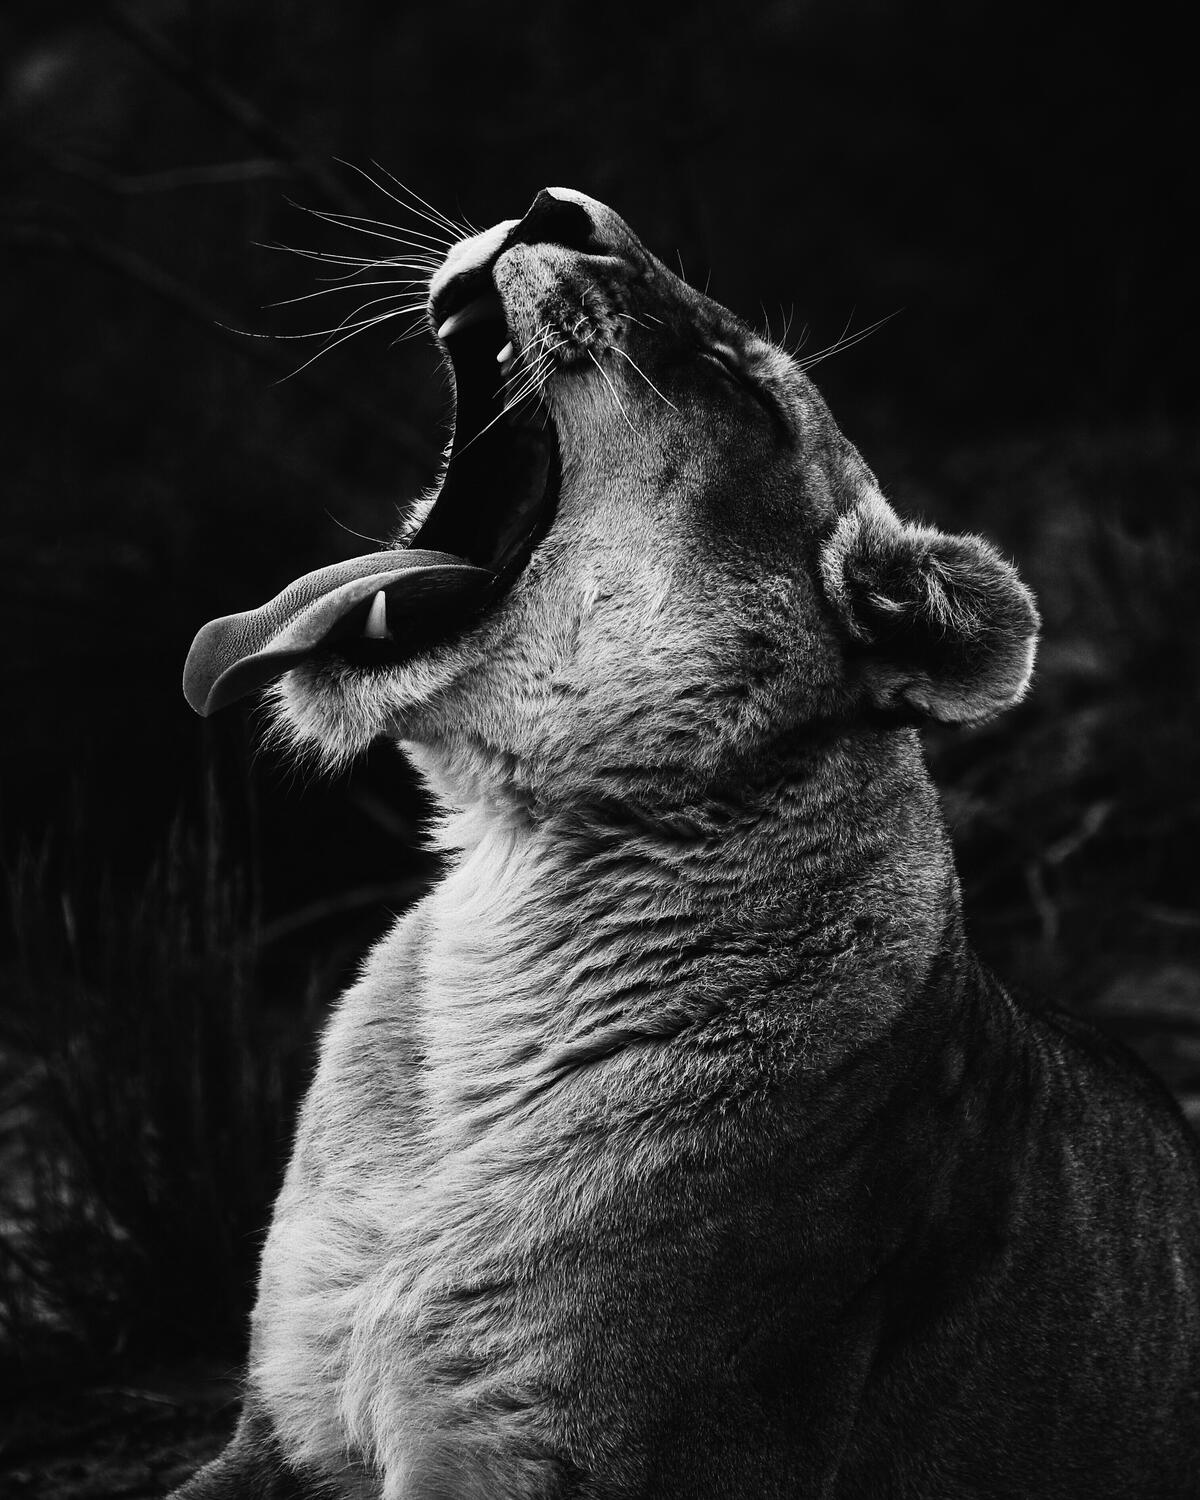 Yawning lioness with outstretched tongue on sulfur background